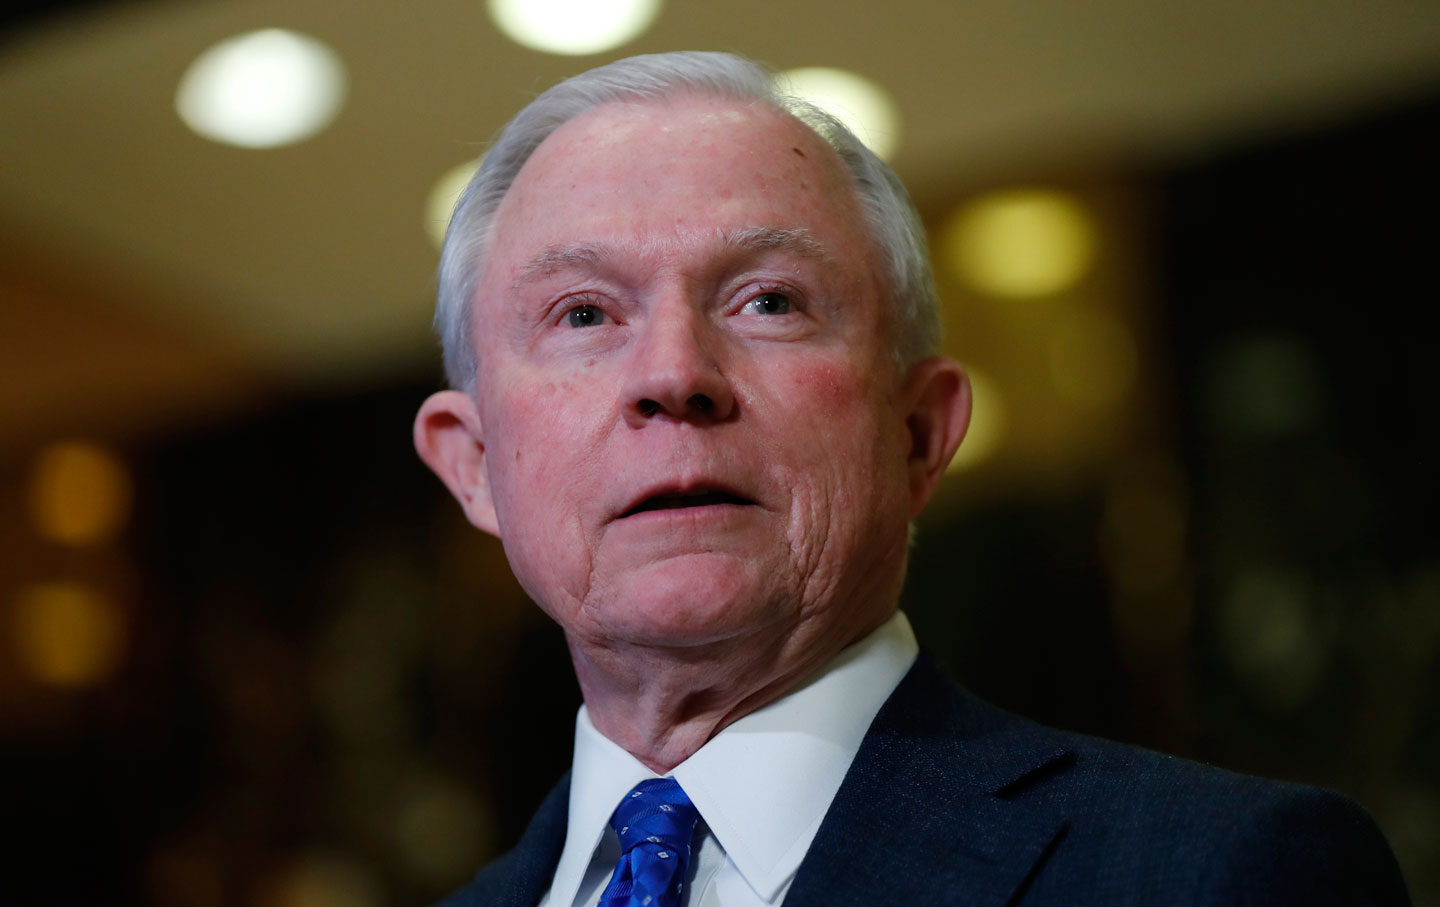 Jeff Sessions Trumps Pick For Attorney General Is A Fierce Opponent Of Civil Rights The Nation